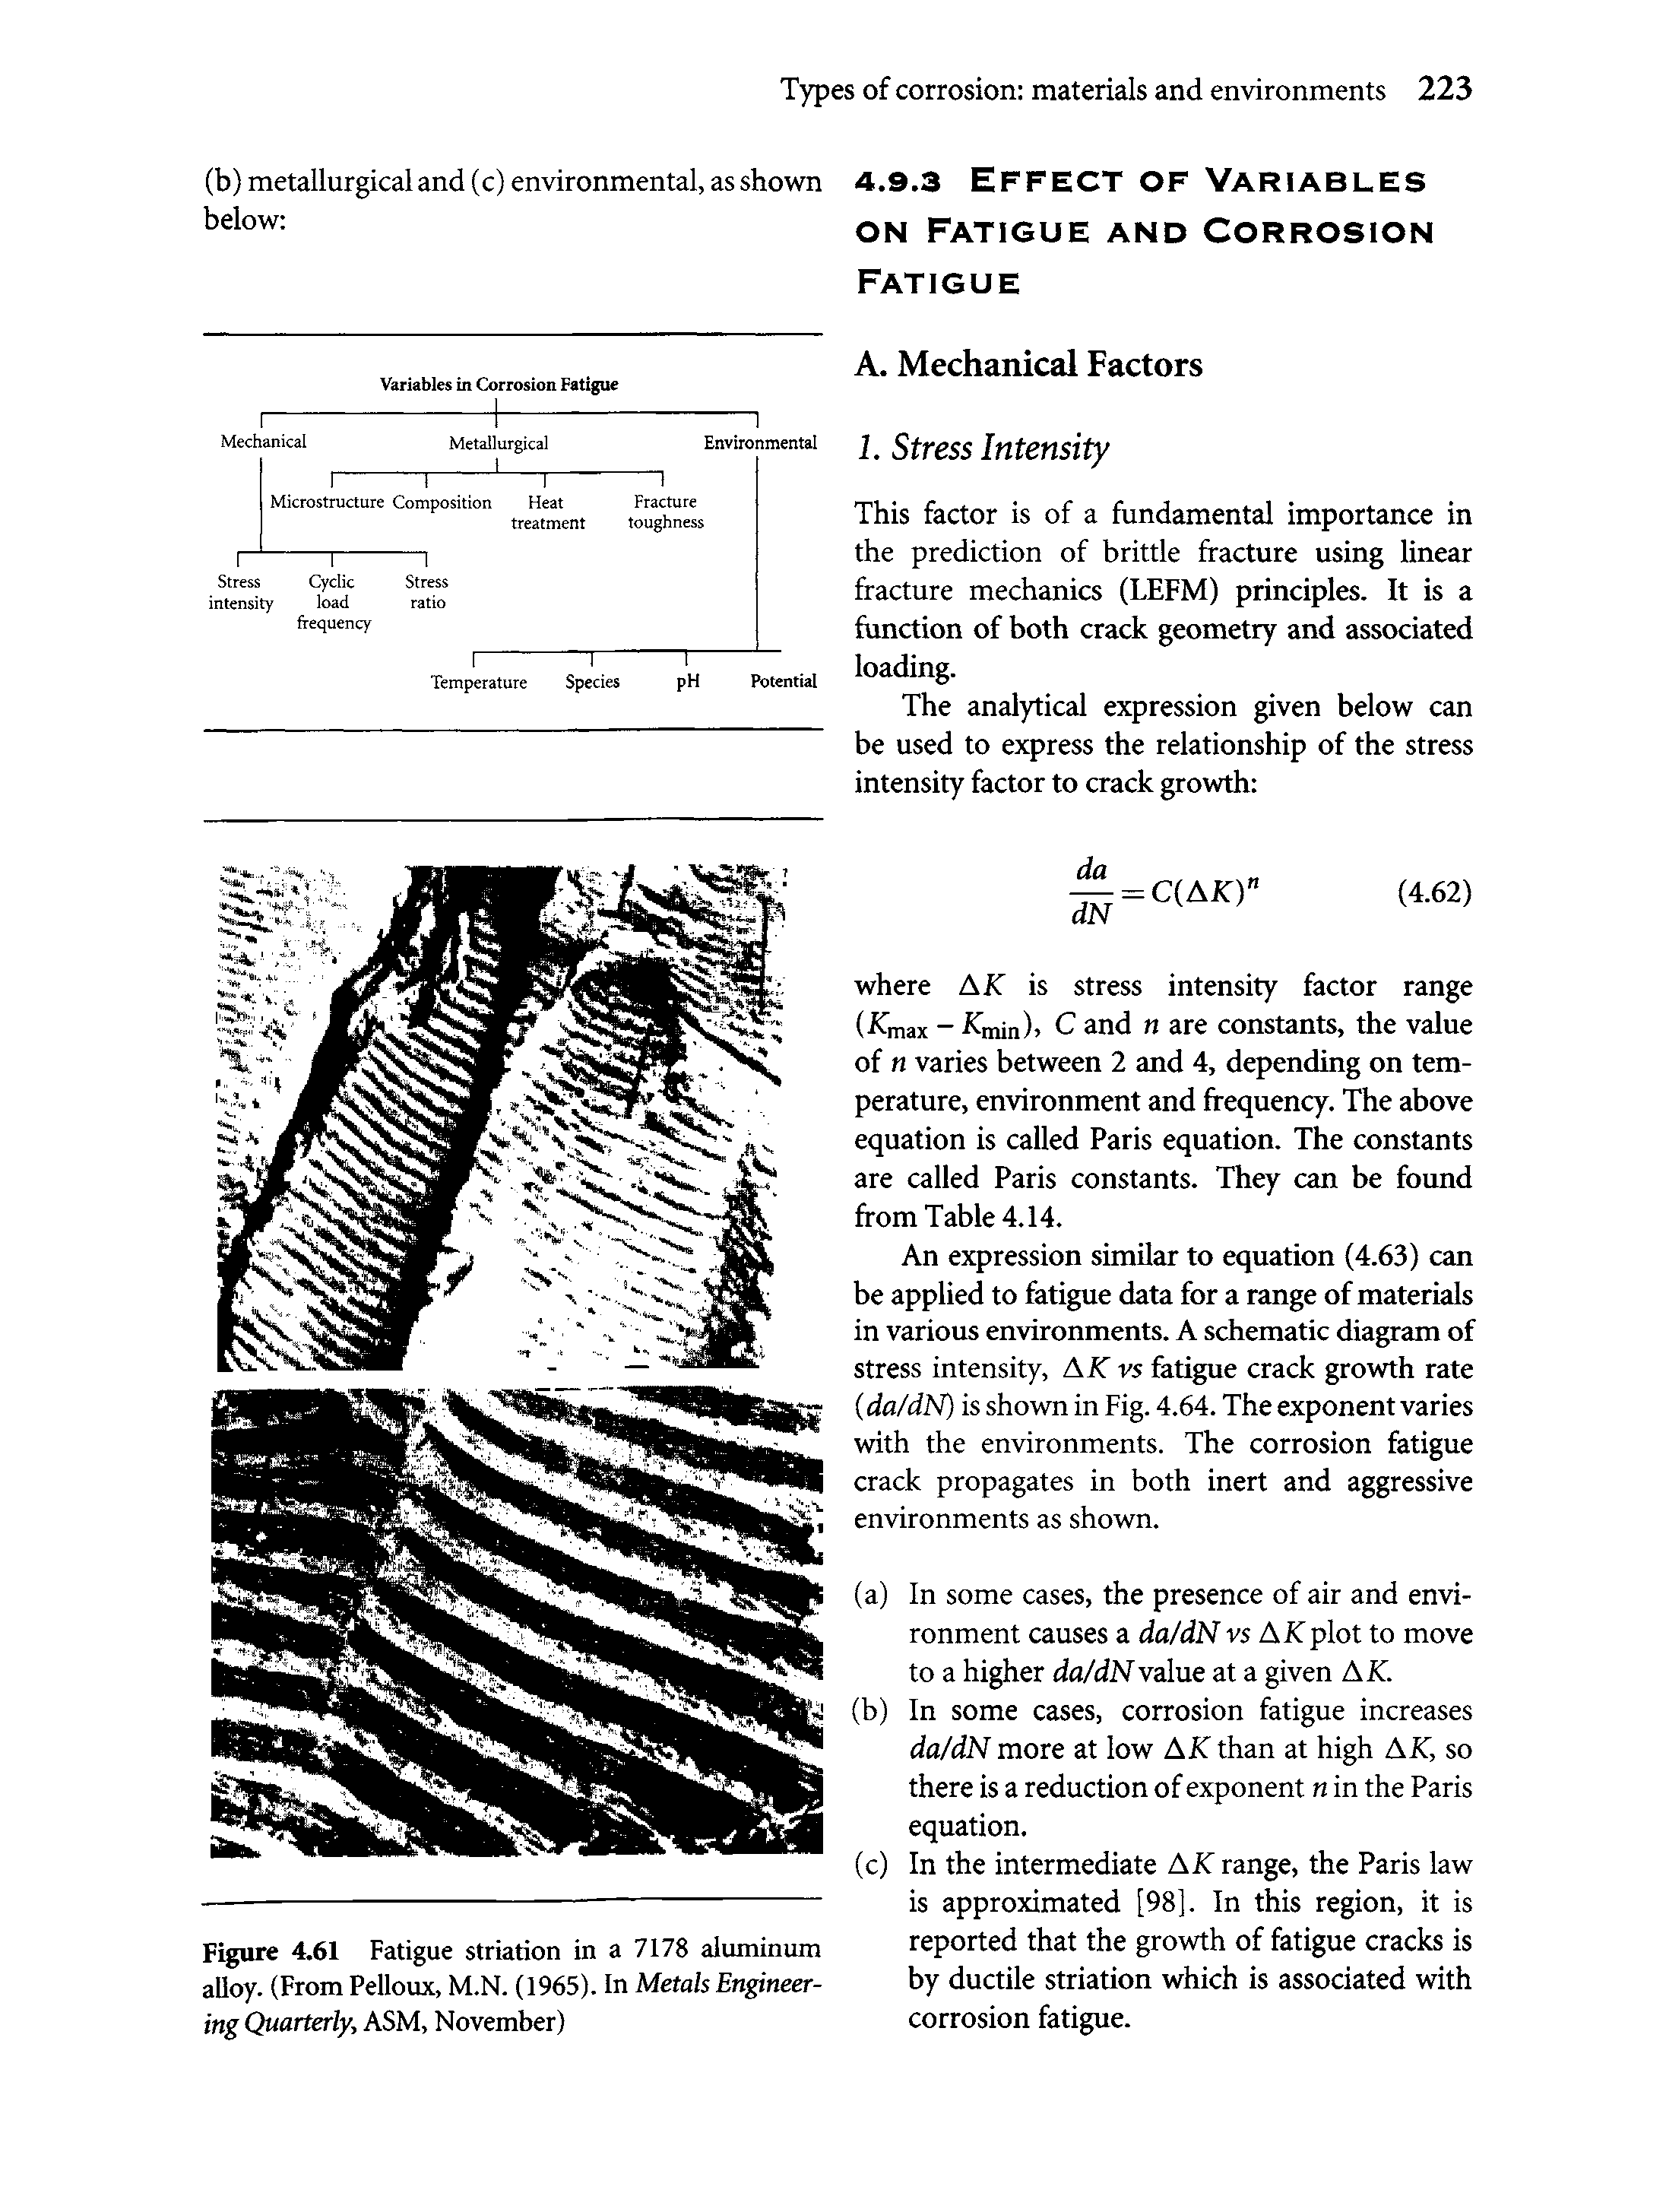 Figure 4.61 Fatigue striation in a 7178 aluminum alloy. (From Pelloux, M.N. (1965). In Metals Engineering Quarterly, ASM, November)...